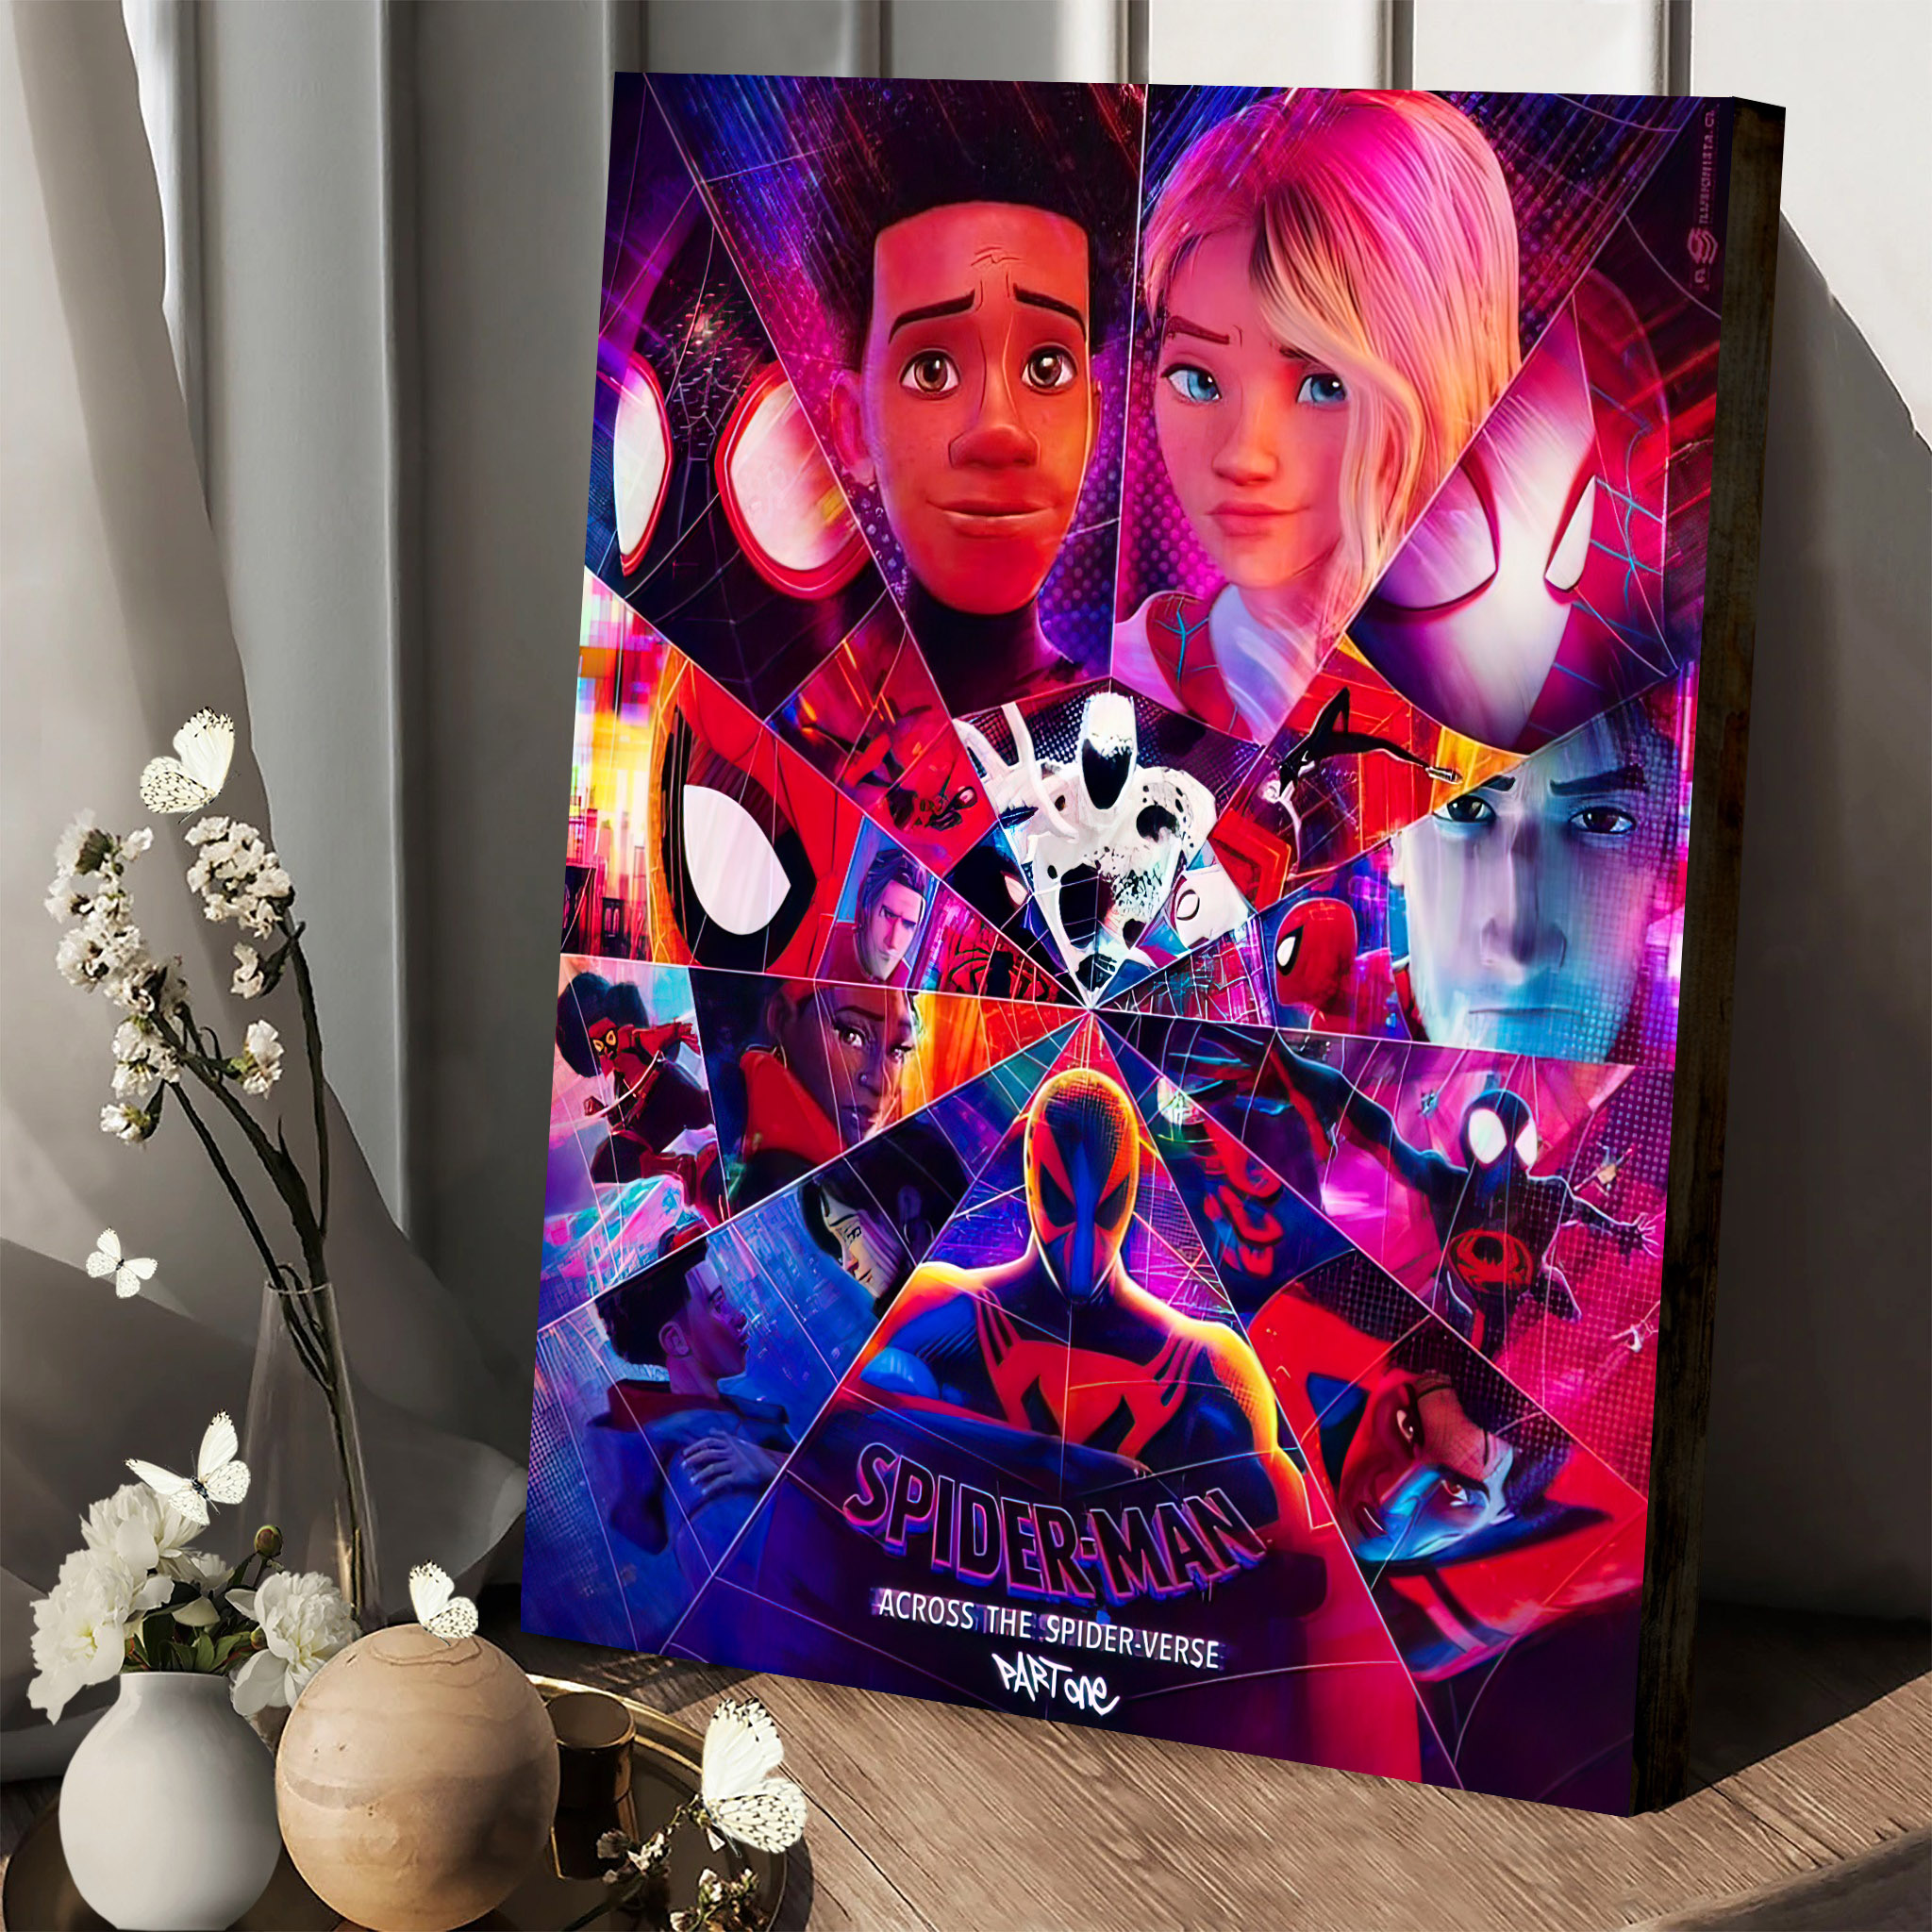 Spiderman Across The Spider-Verse movie 2023 poster (e) - Spiderman poster